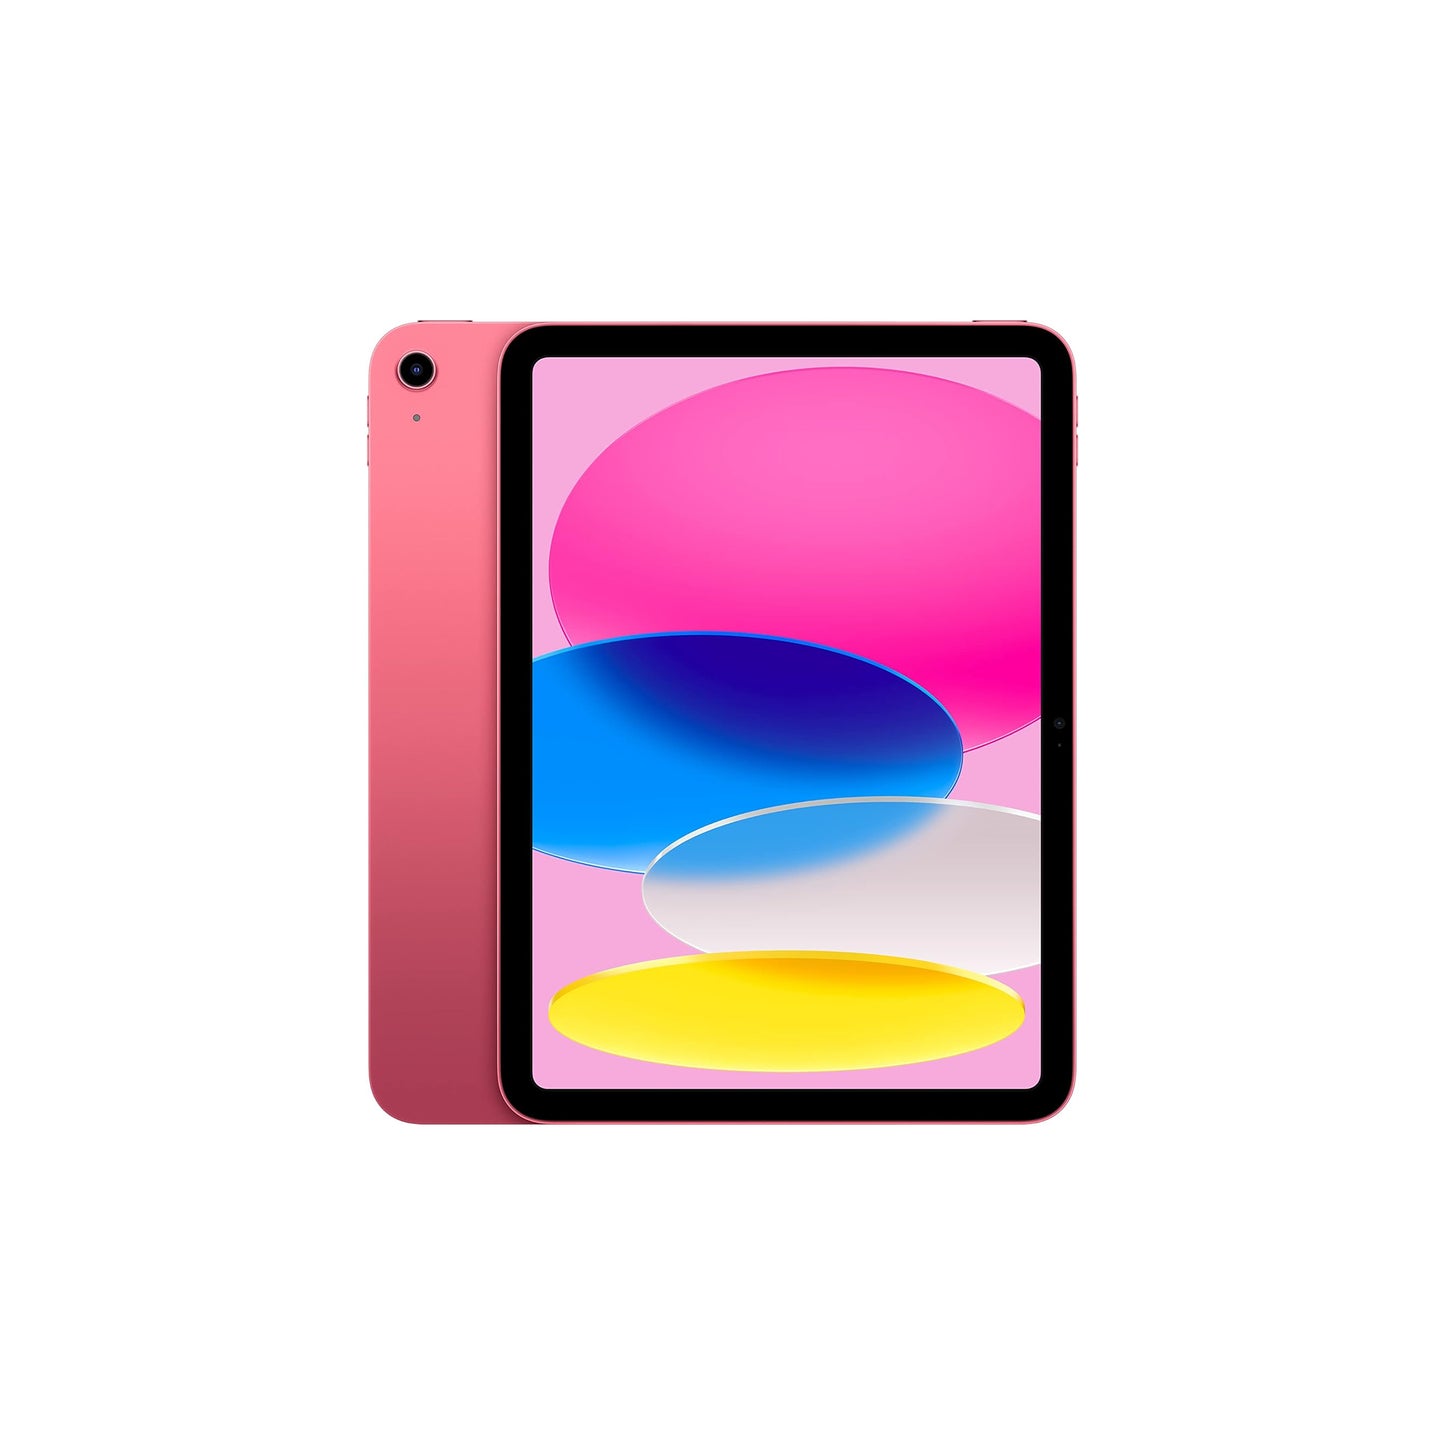 Apple iPad (10th Generation): with A14 Bionic chip, 10.9-inch Liquid Retina Display, 64GB, Wi-Fi 6, 12MP front/12MP Back Camera, Touch ID, All-Day Battery Life – Pink